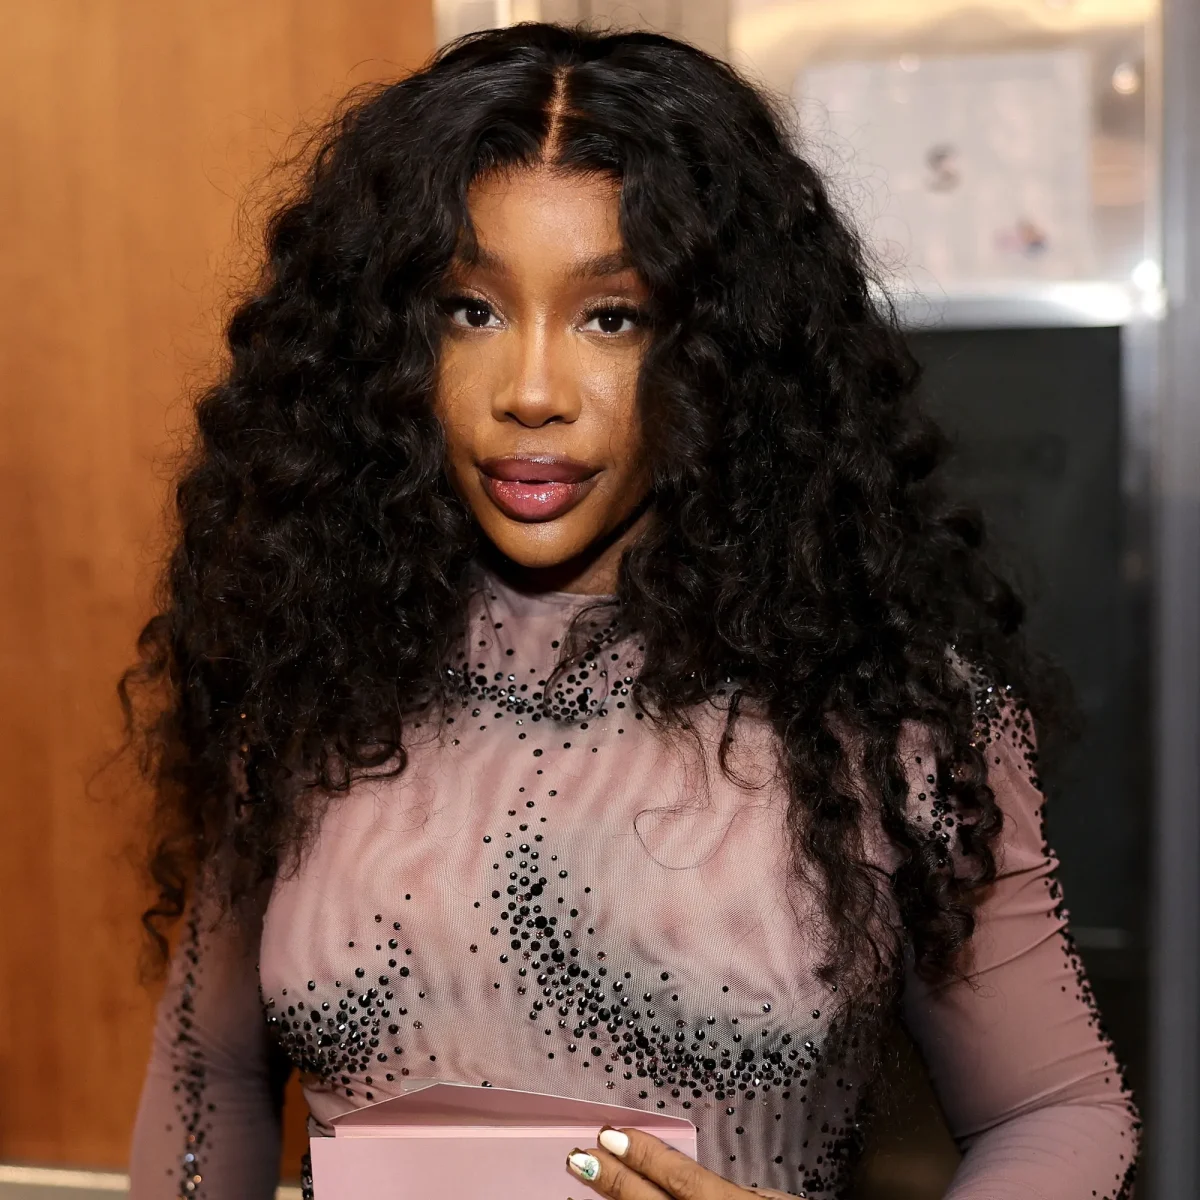 Sza Reacts To Fans' Unruly Behavior At Her Aussie Concert 1